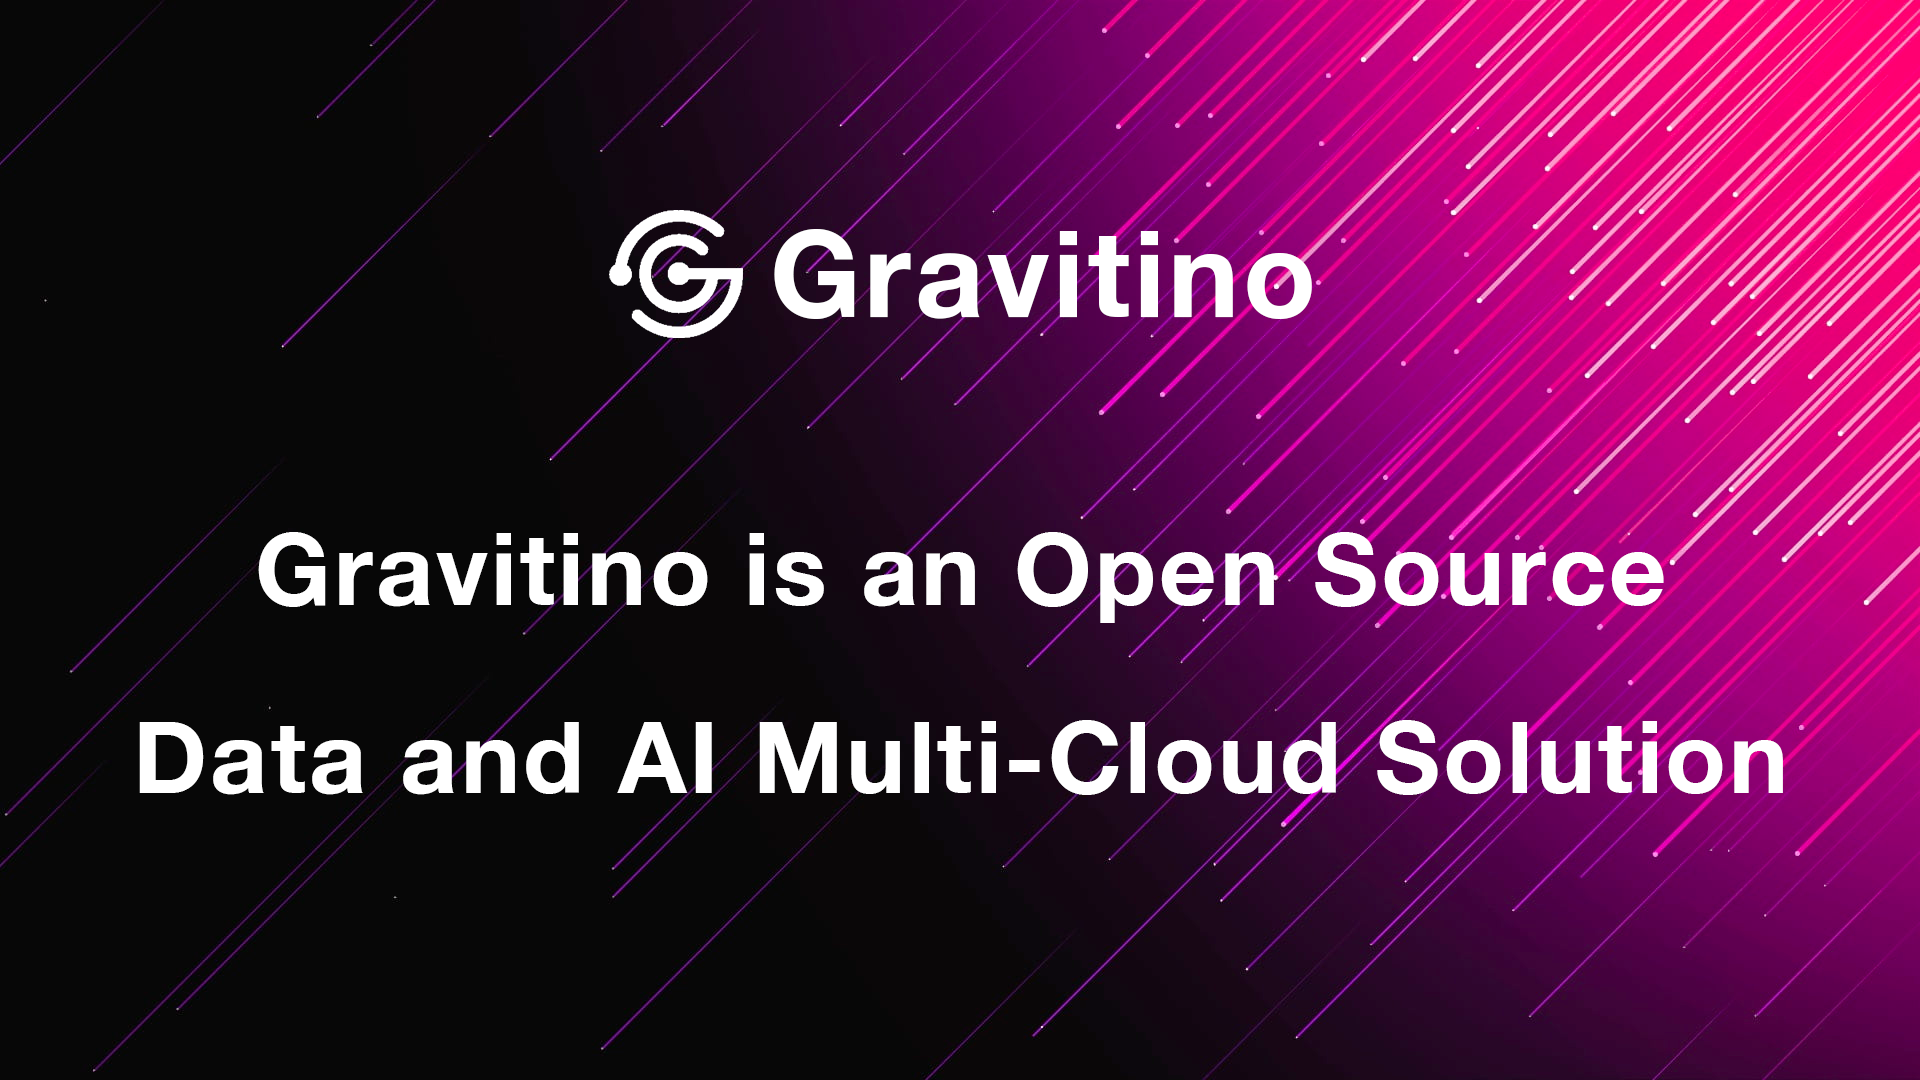 Gravitino is an Open Source Data and AI Multi-Cloud Solution